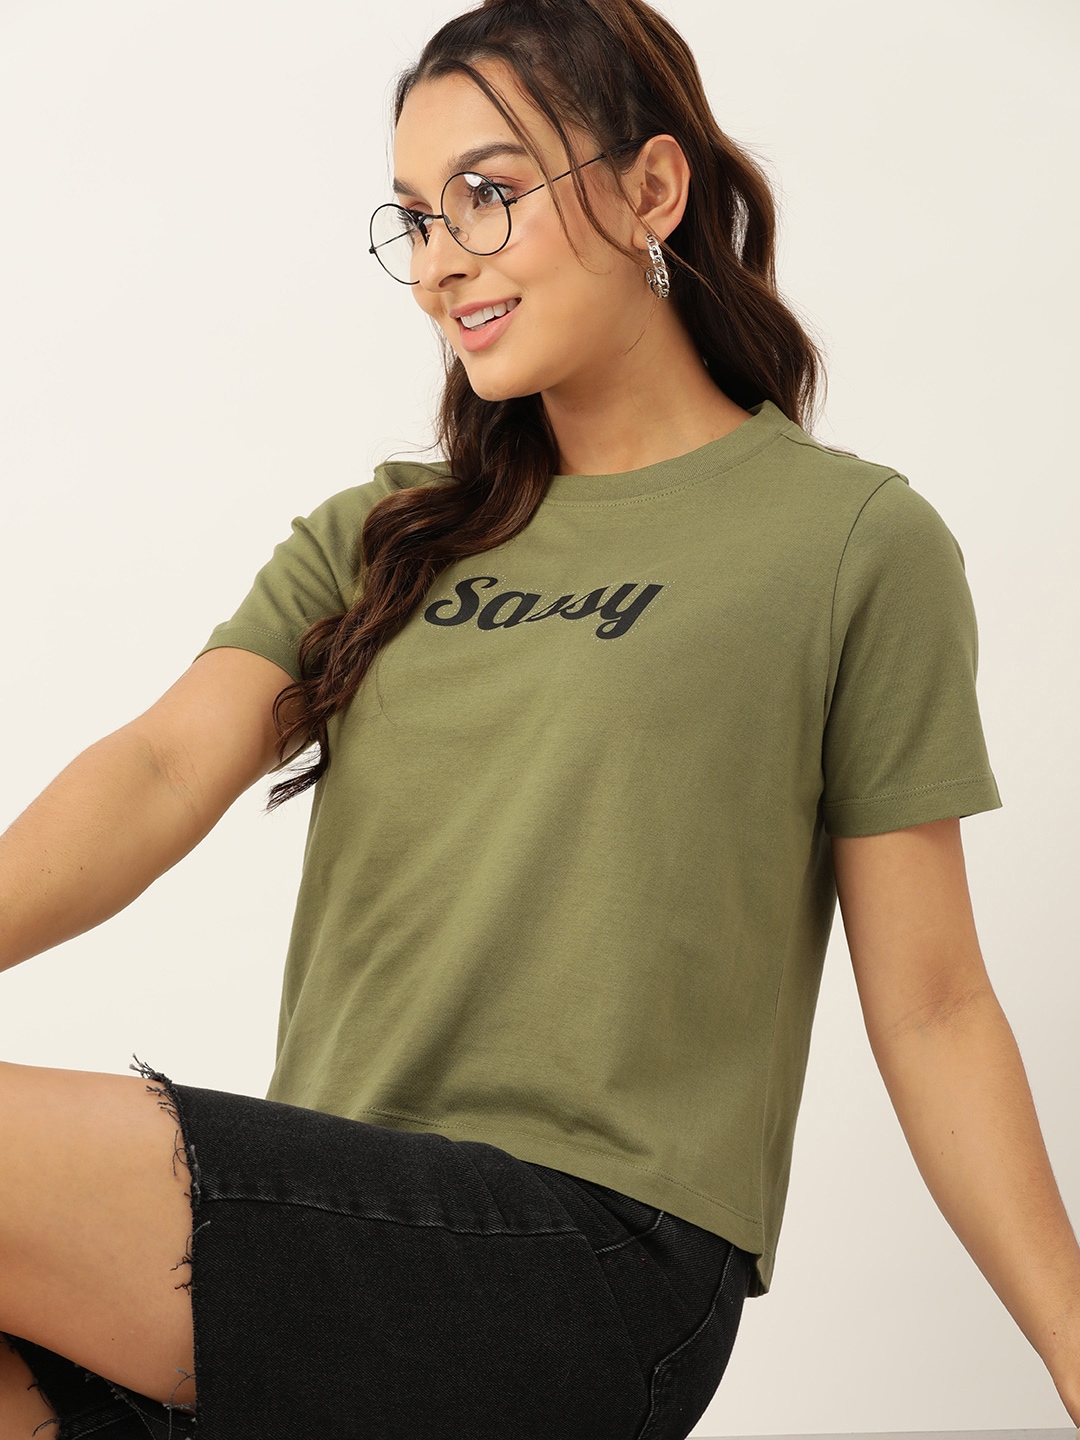 

DressBerry Women Typography Printed Cotton T-shirt, Olive